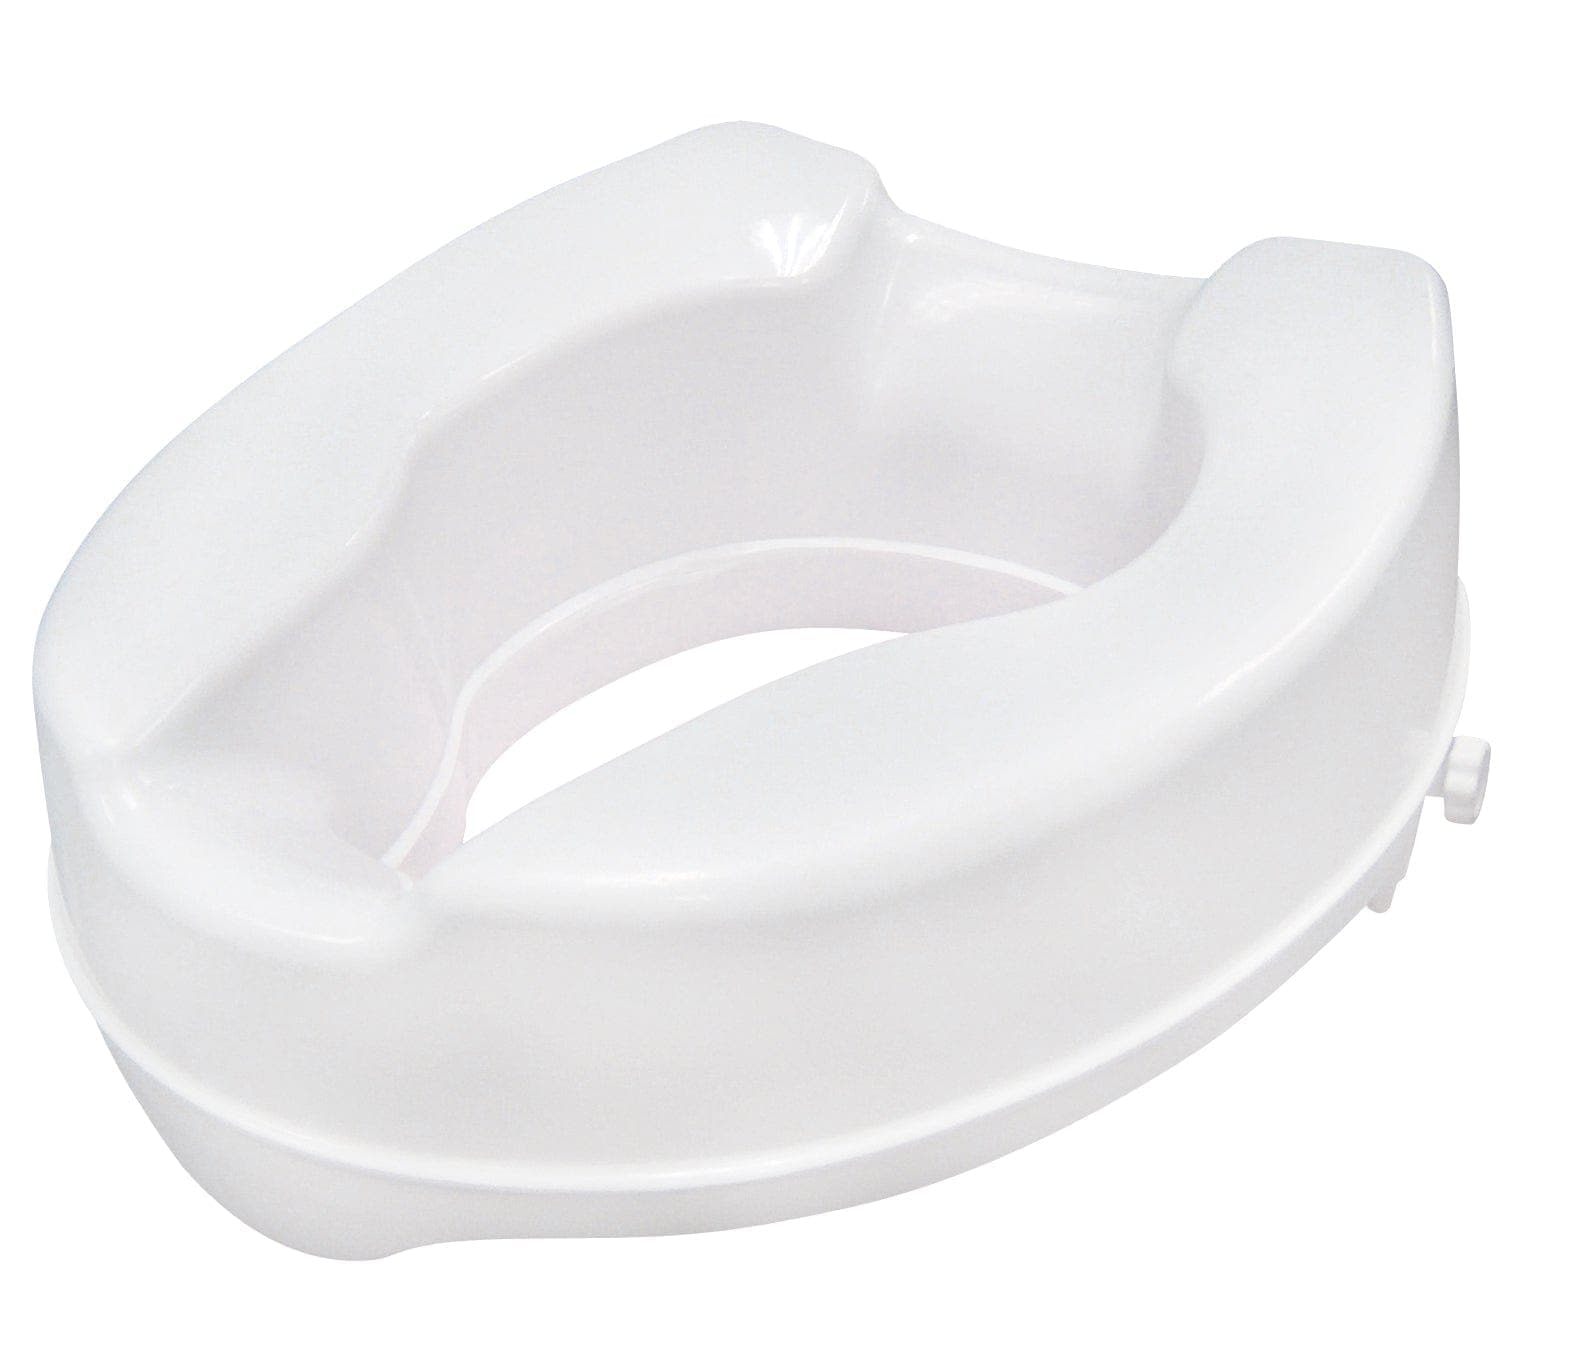 Drive Medical Bathroom Safety 4" Height Drive Medical Raised Toilet Seat with Lock, Standard Seat